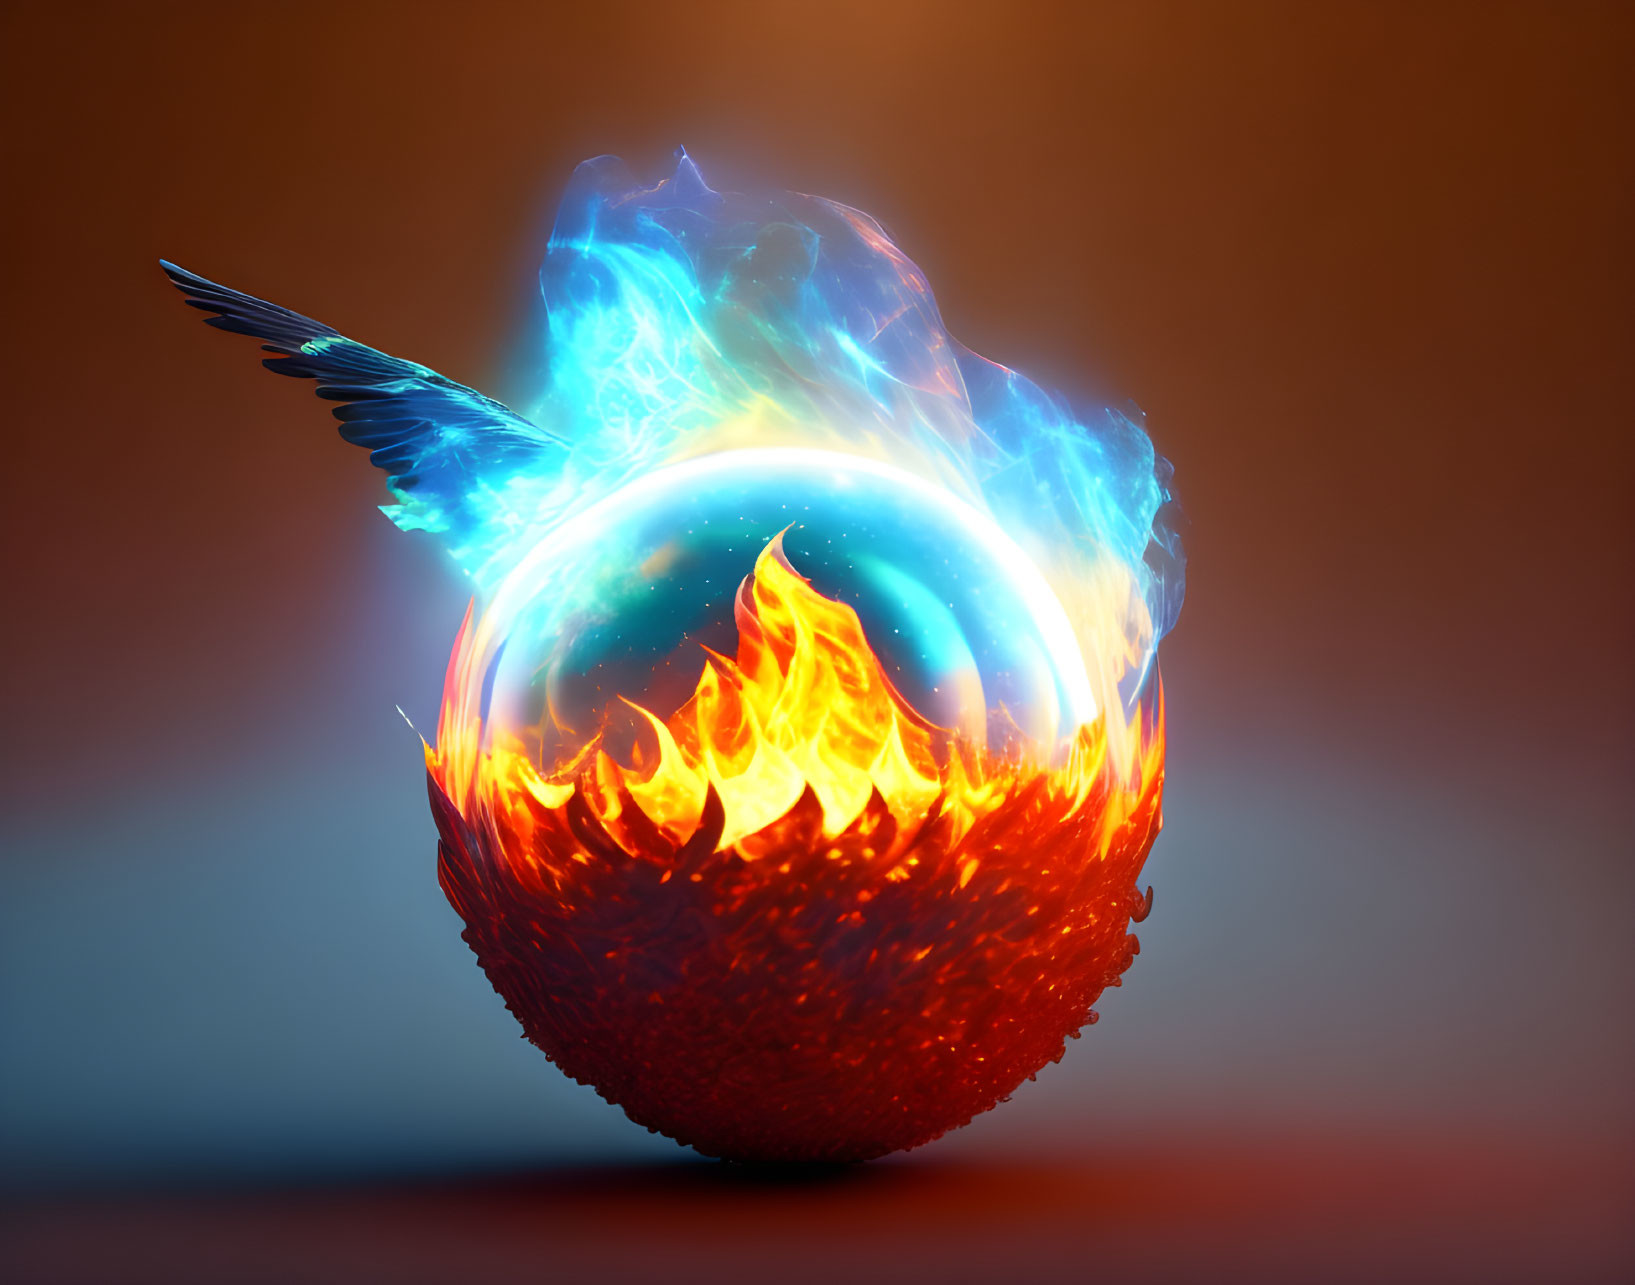 A crow in a ball of fire 